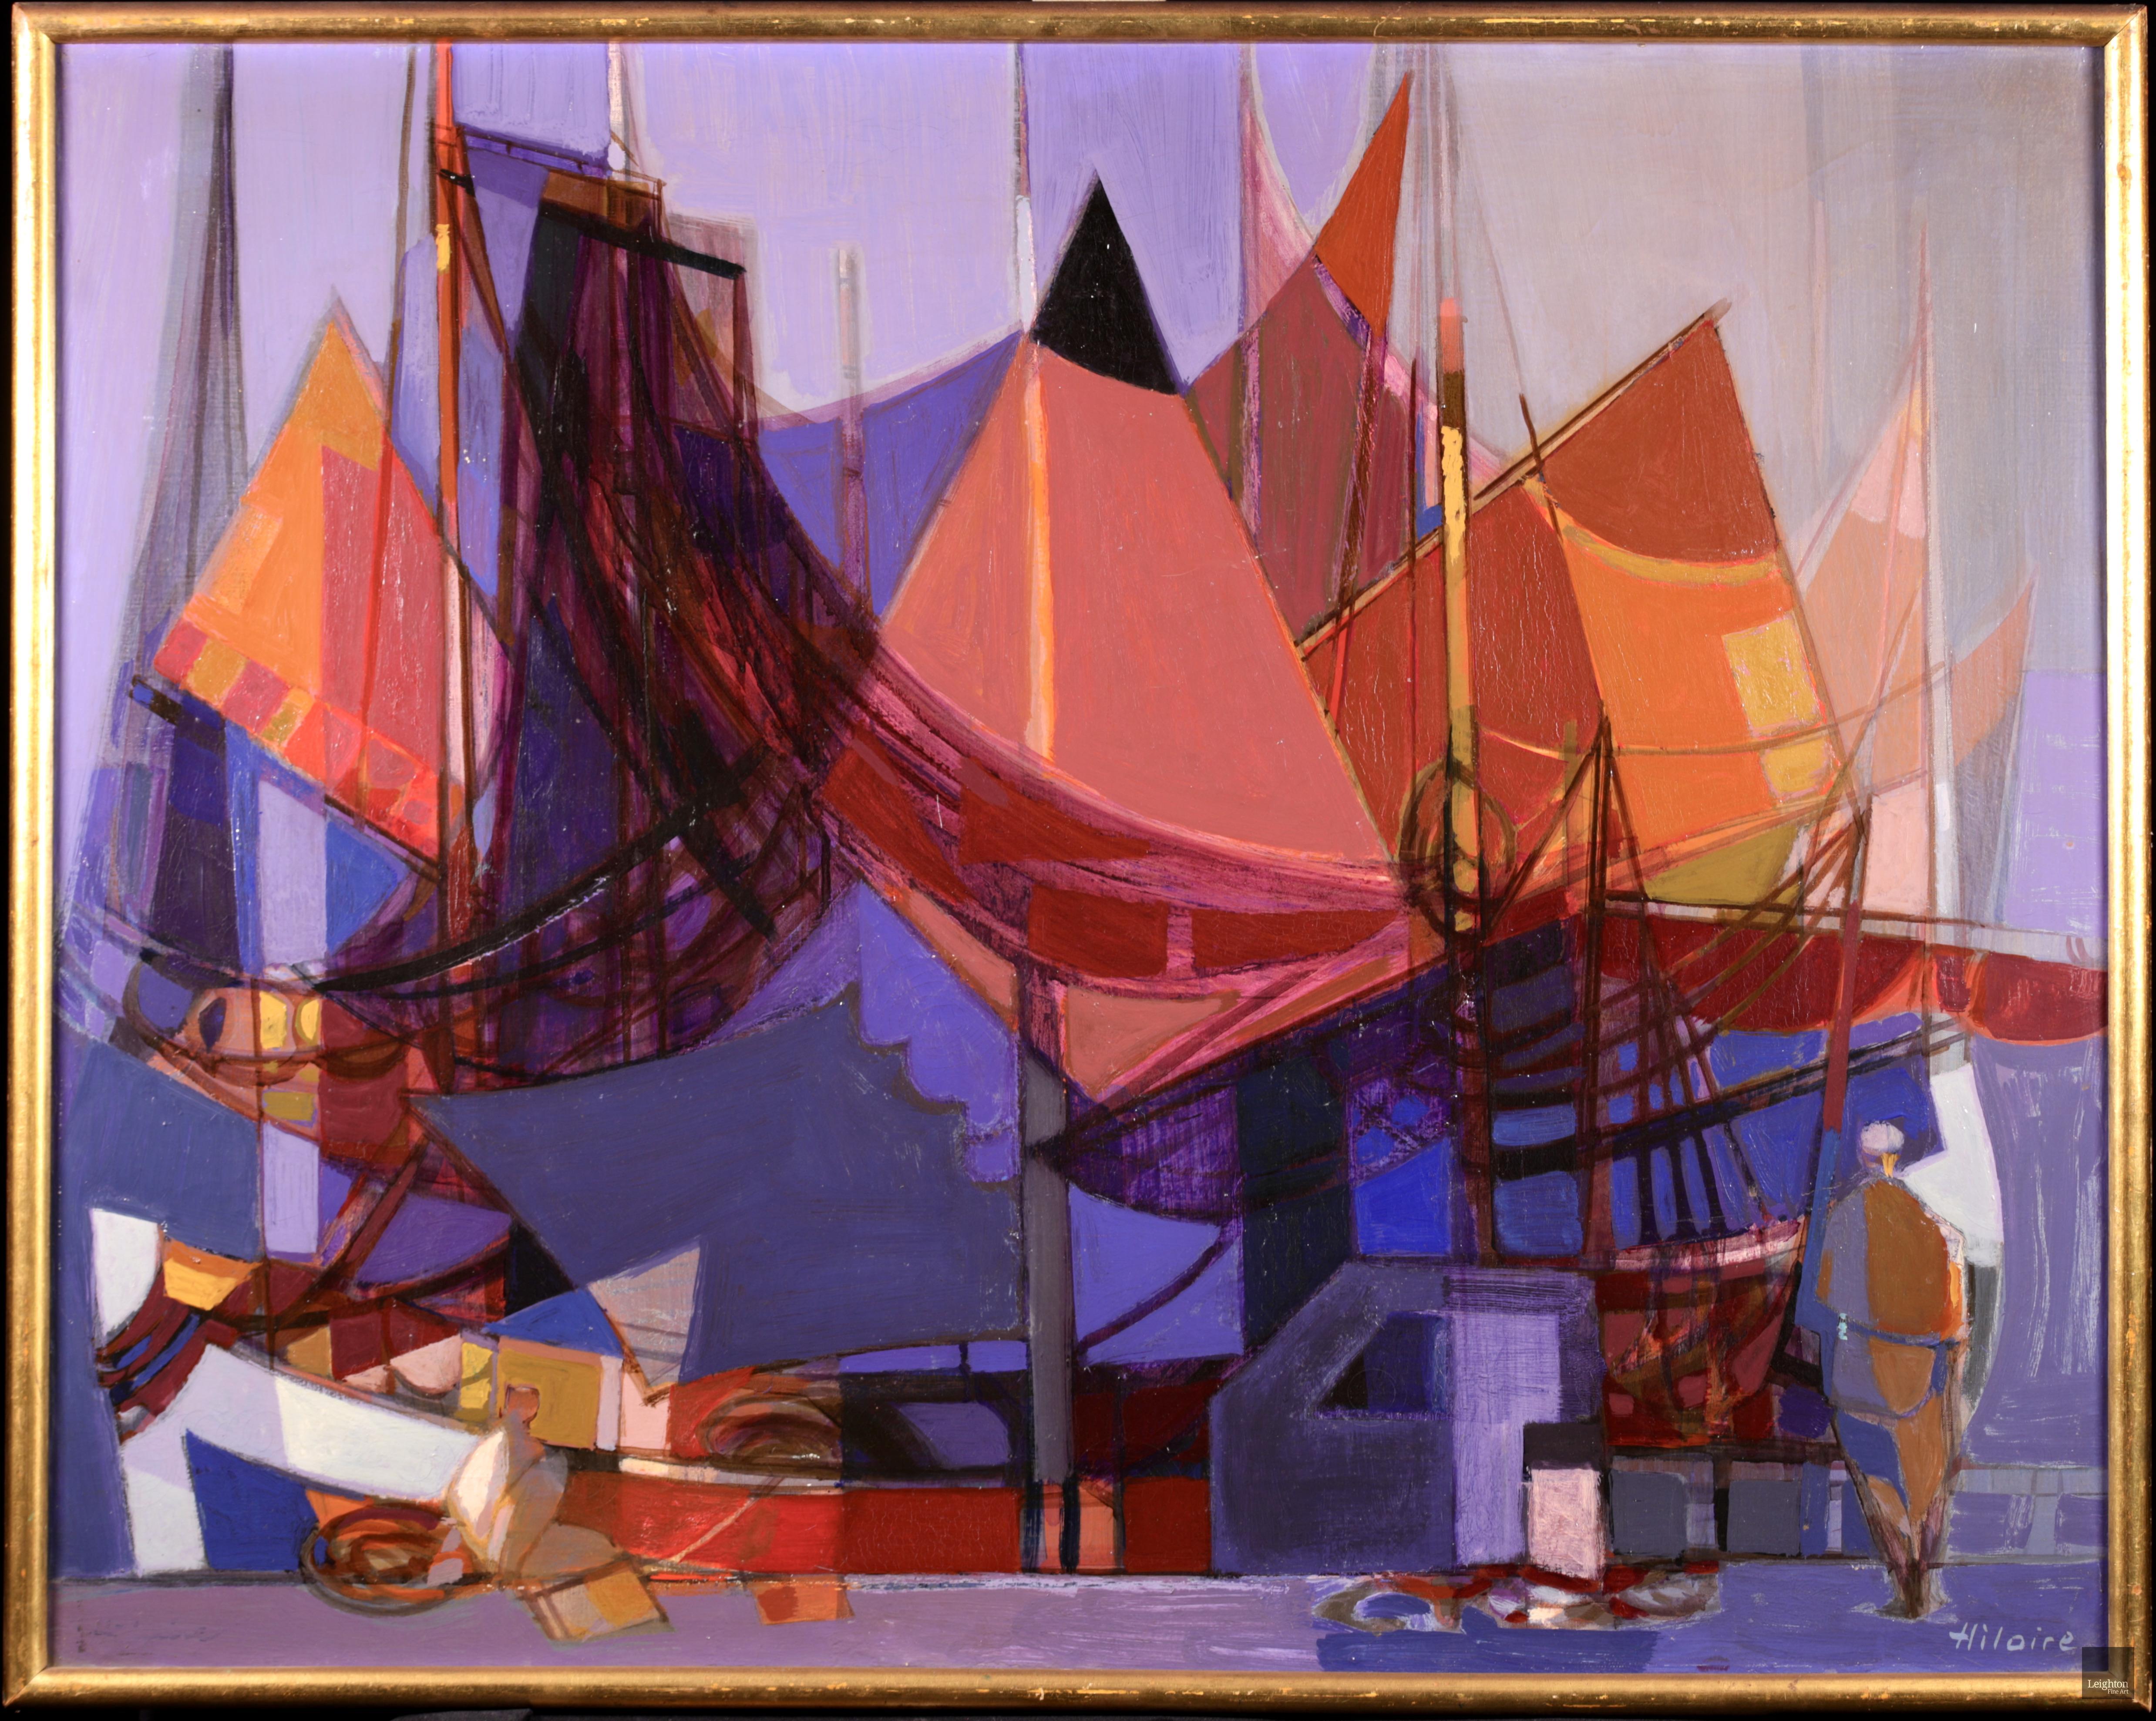 Camille Hilaire - Romeo de Ravenne - Cubist Oil, Figure and Boat on  Landscape by Camille Hilaire For Sale at 1stDibs